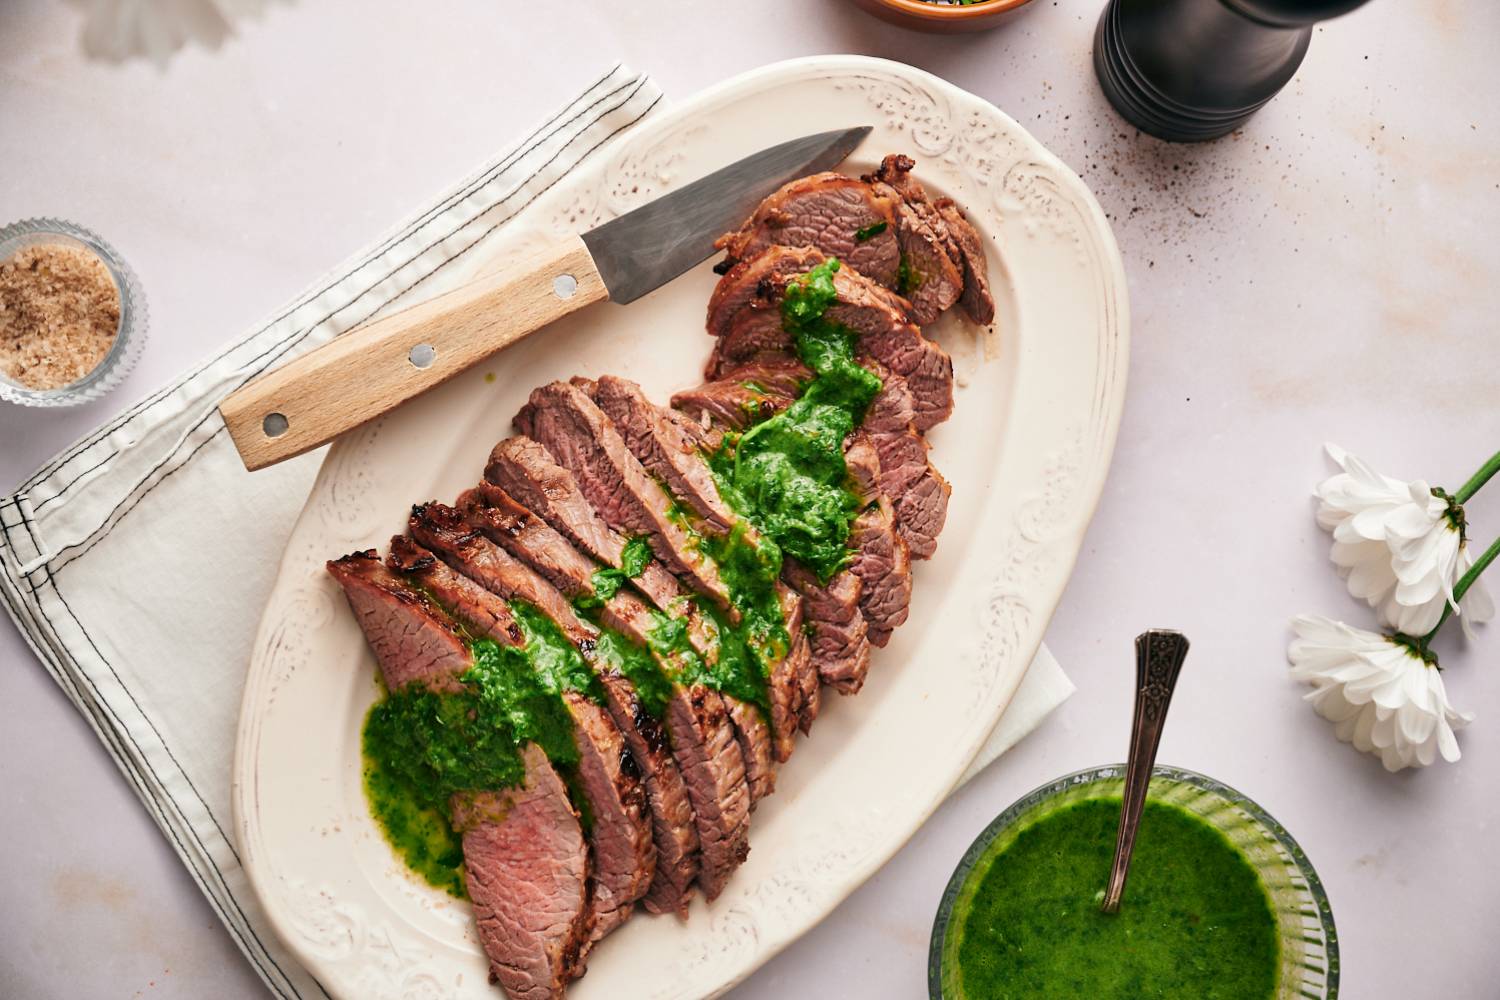 Broiled flank steak cooked until medium rare and sliced on a plate with chimichurri.